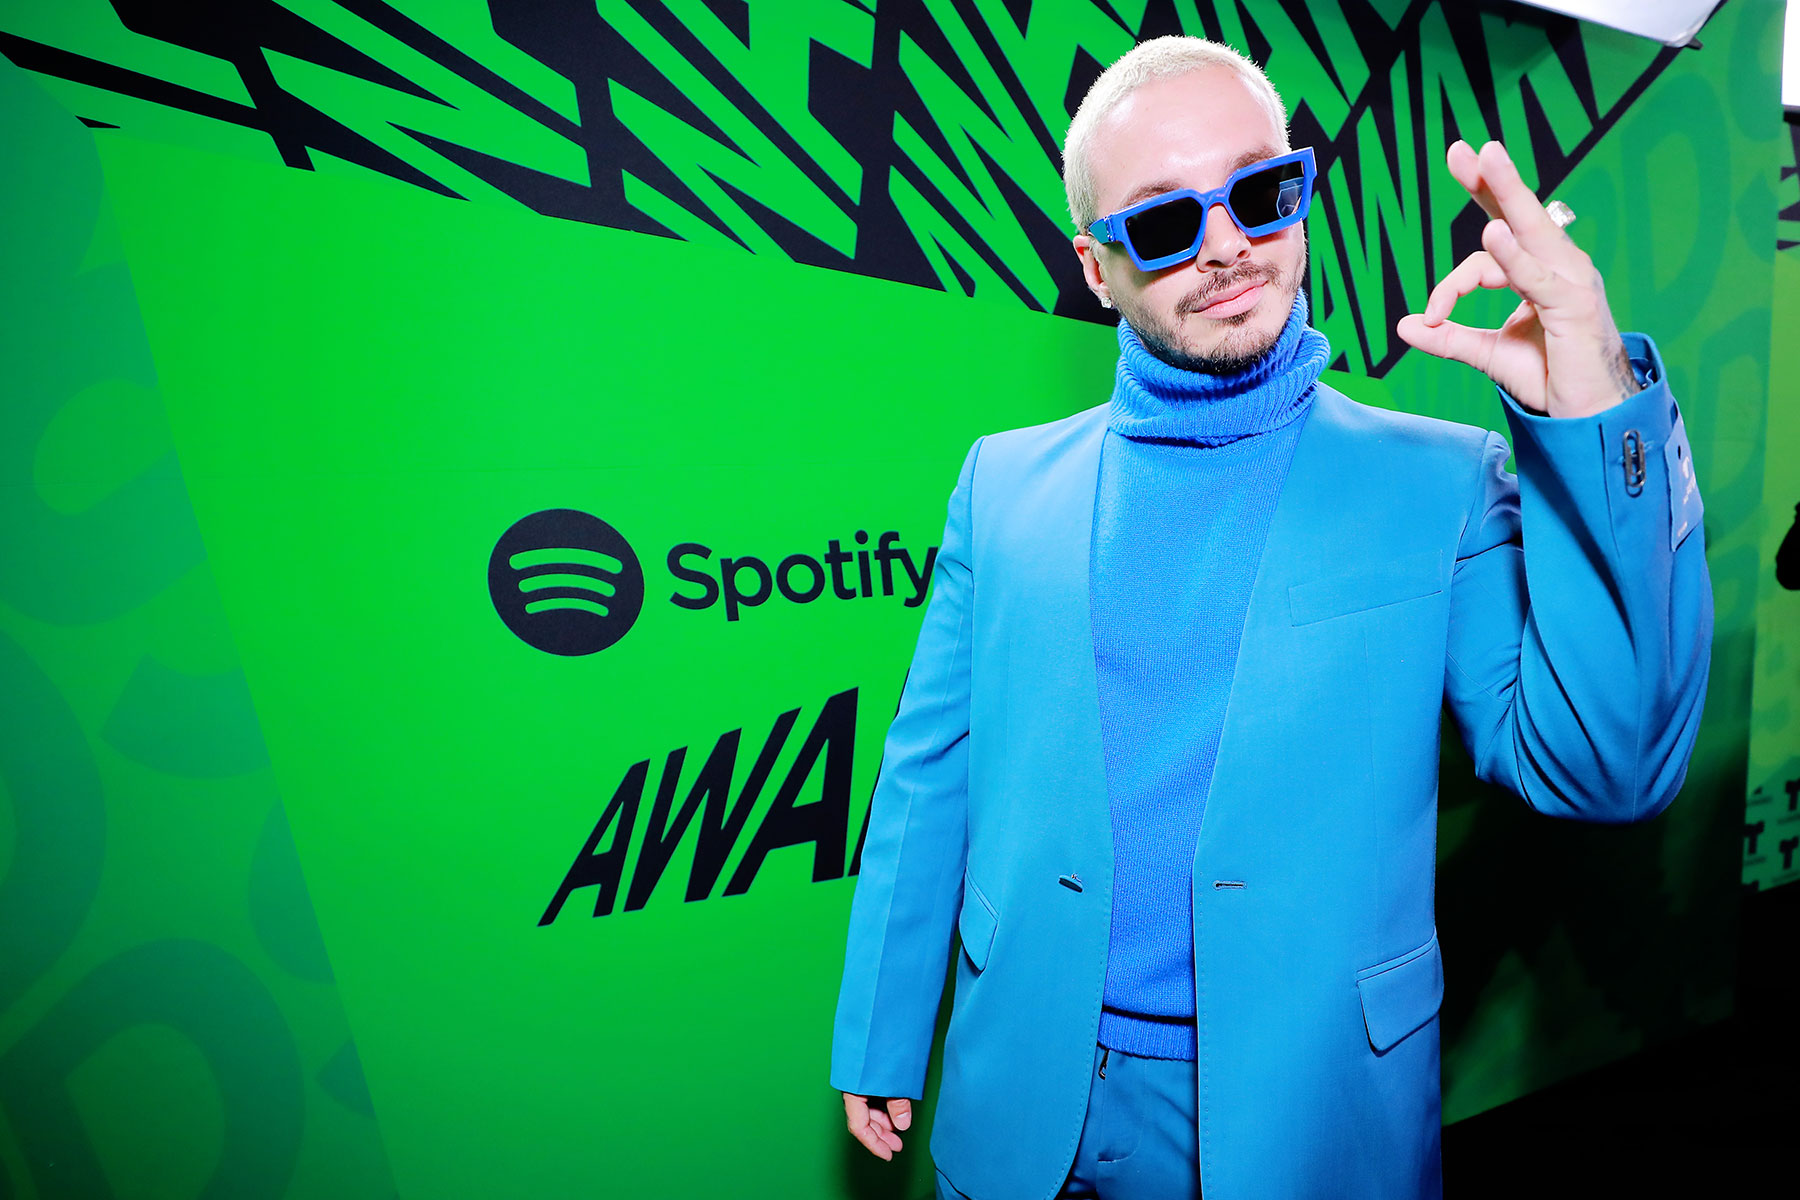 MEXICO CITY, MEXICO - MARCH 05: J Balvin attends the 2020 Spotify Awards at the Auditorio Nacional on March 05, 2020 in Mexico City, Mexico. (Photo by Manuel Velasquez/Getty Images for Spotify)